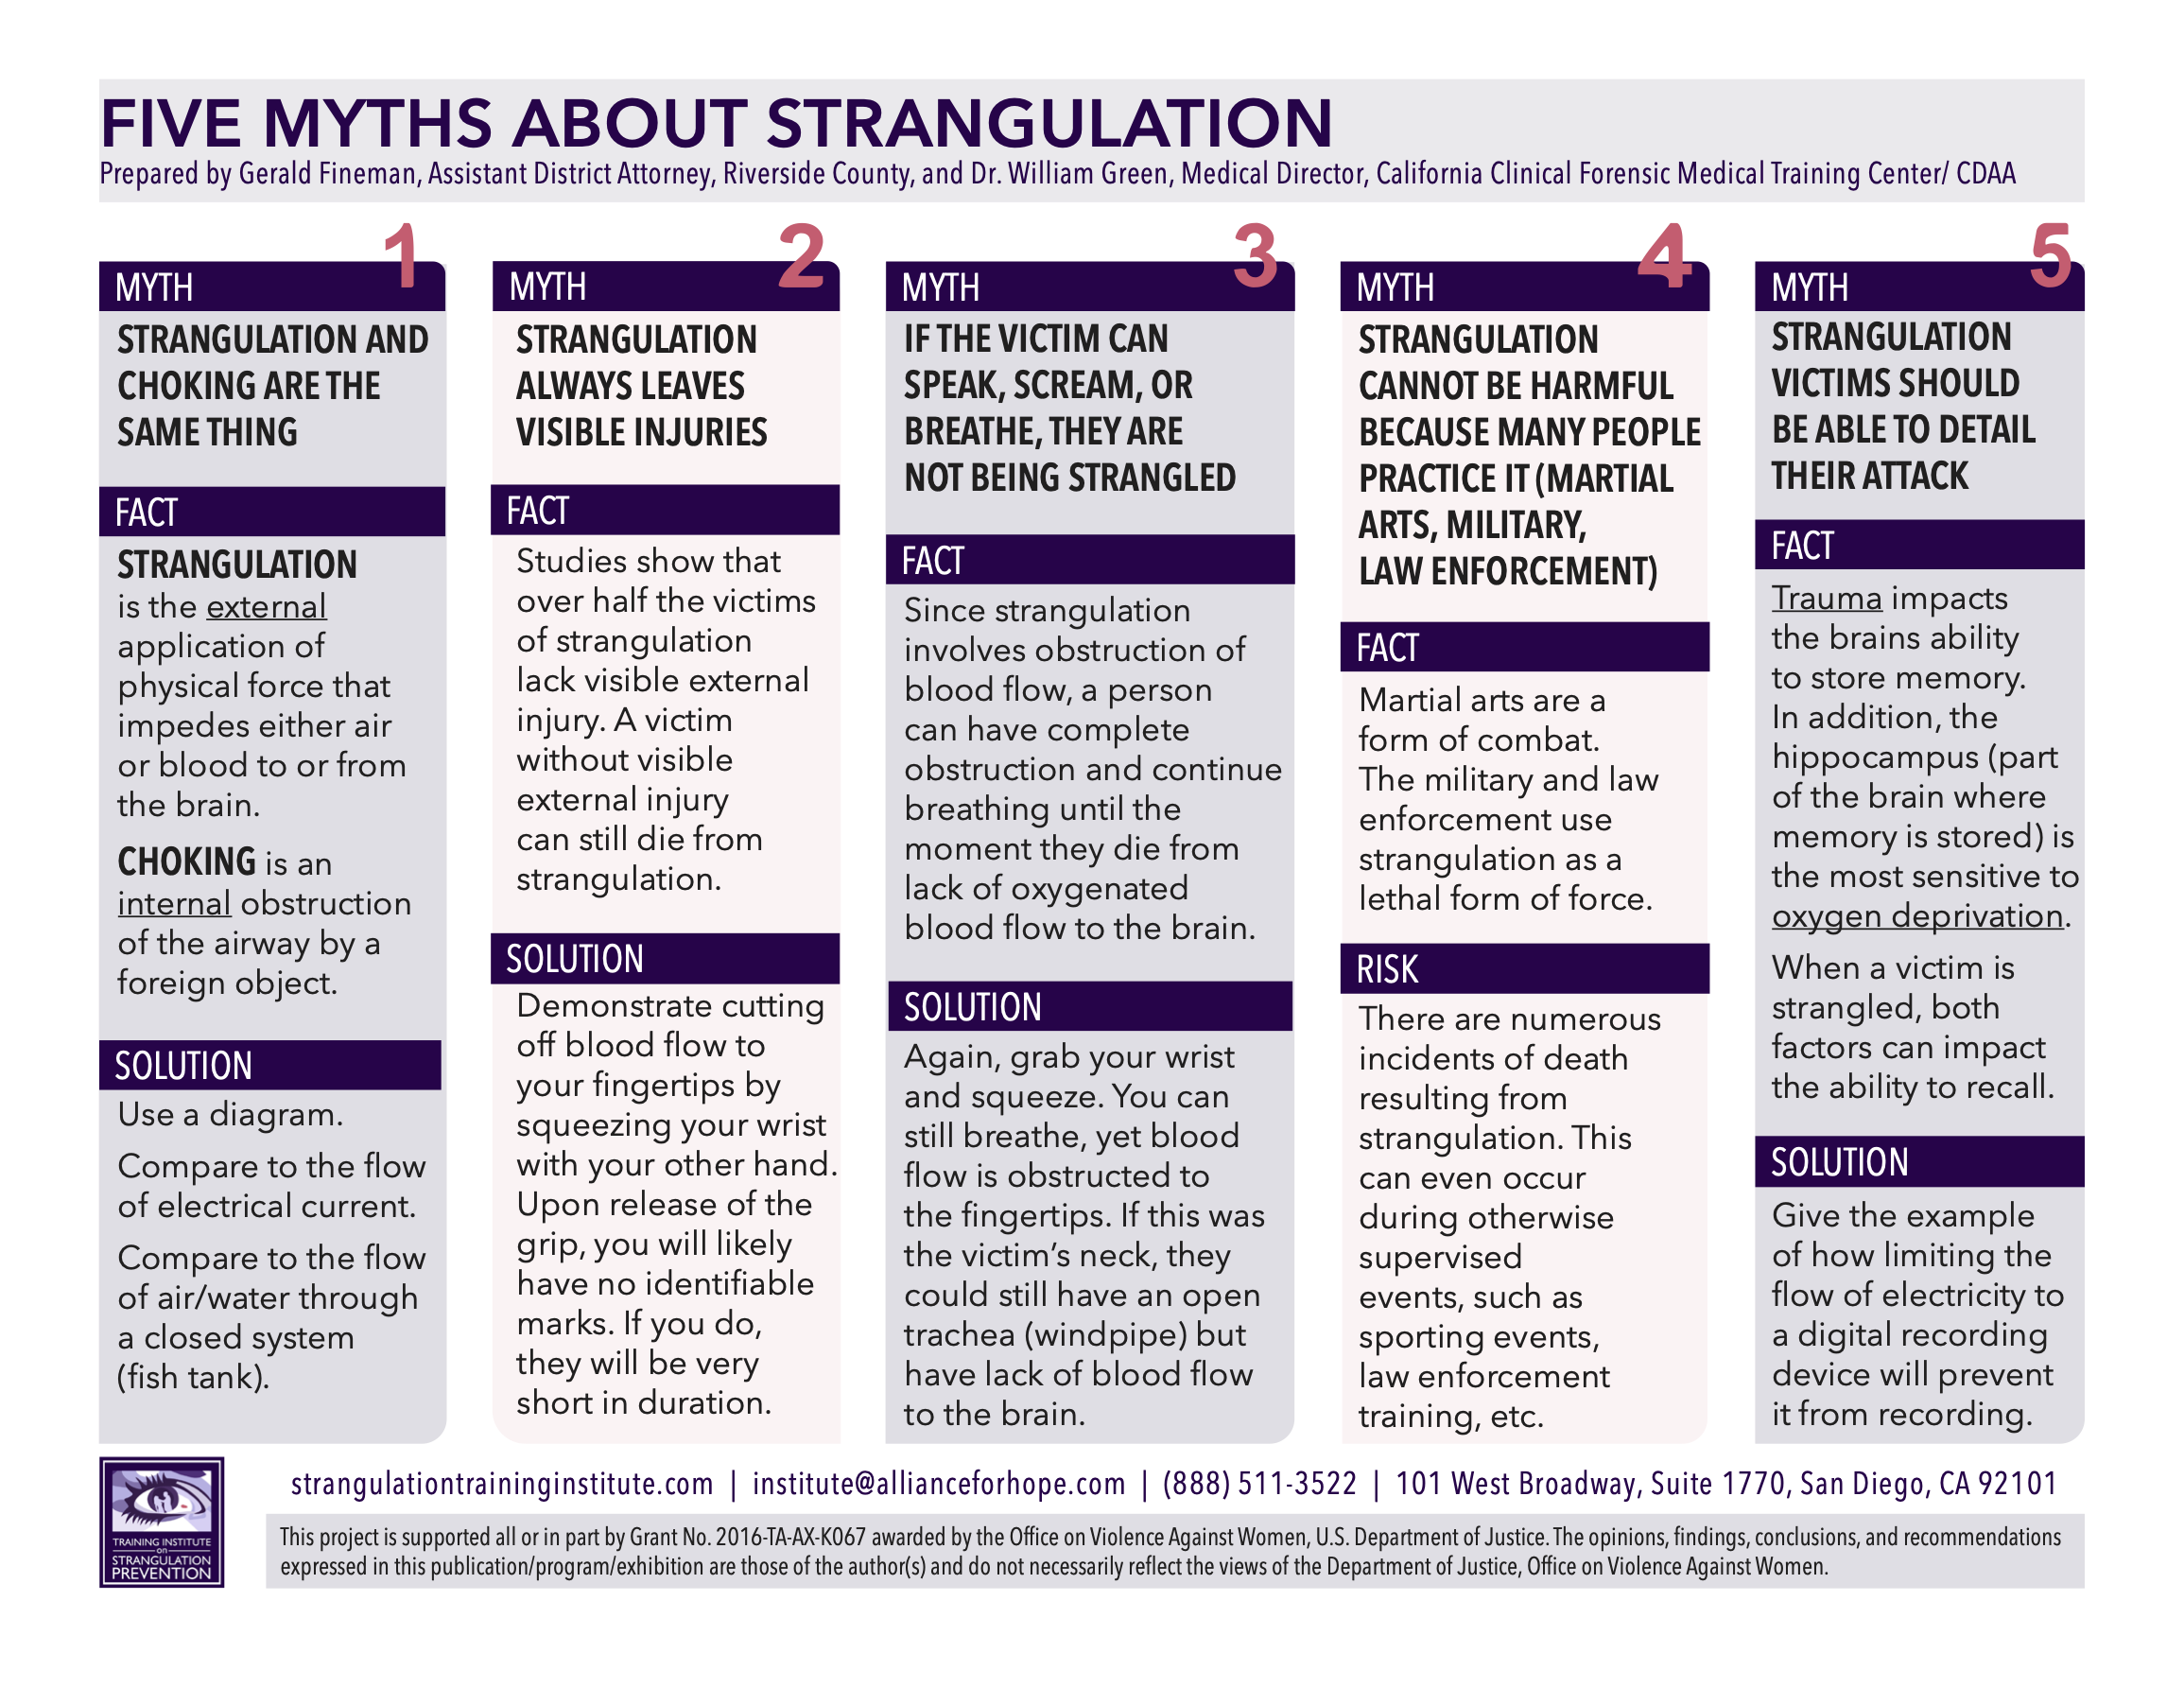 Click this image to open the PDF detailing the 5 myths about strangulation